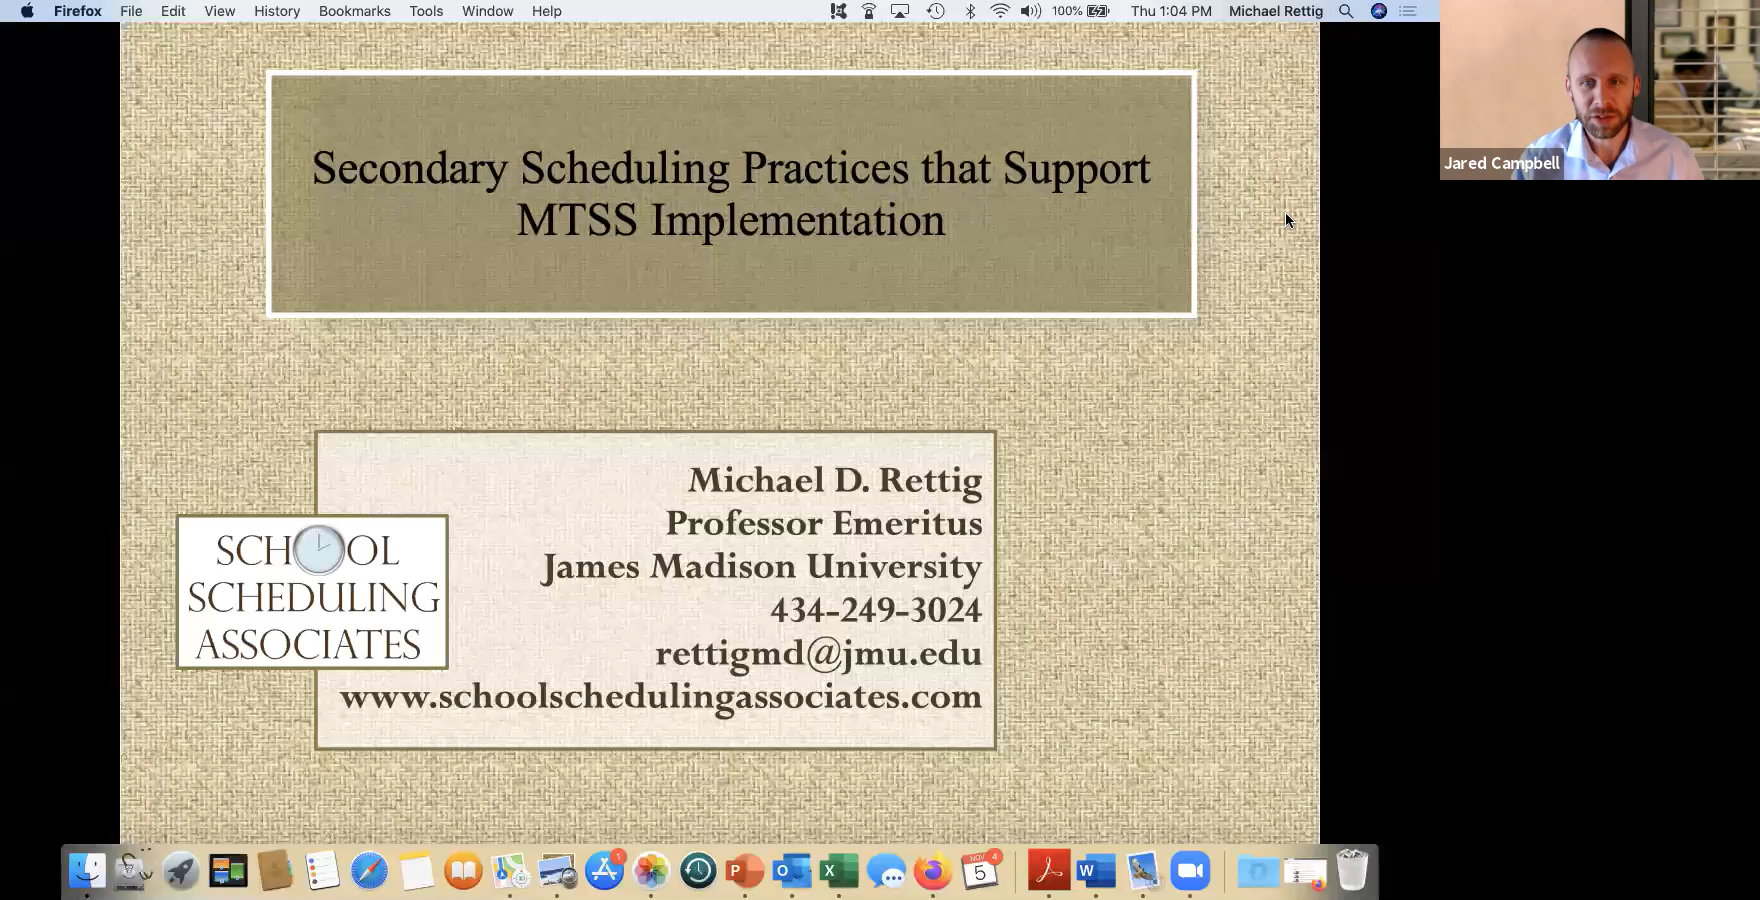 Secondary Scheduling Practices that Support MTSS Implementation